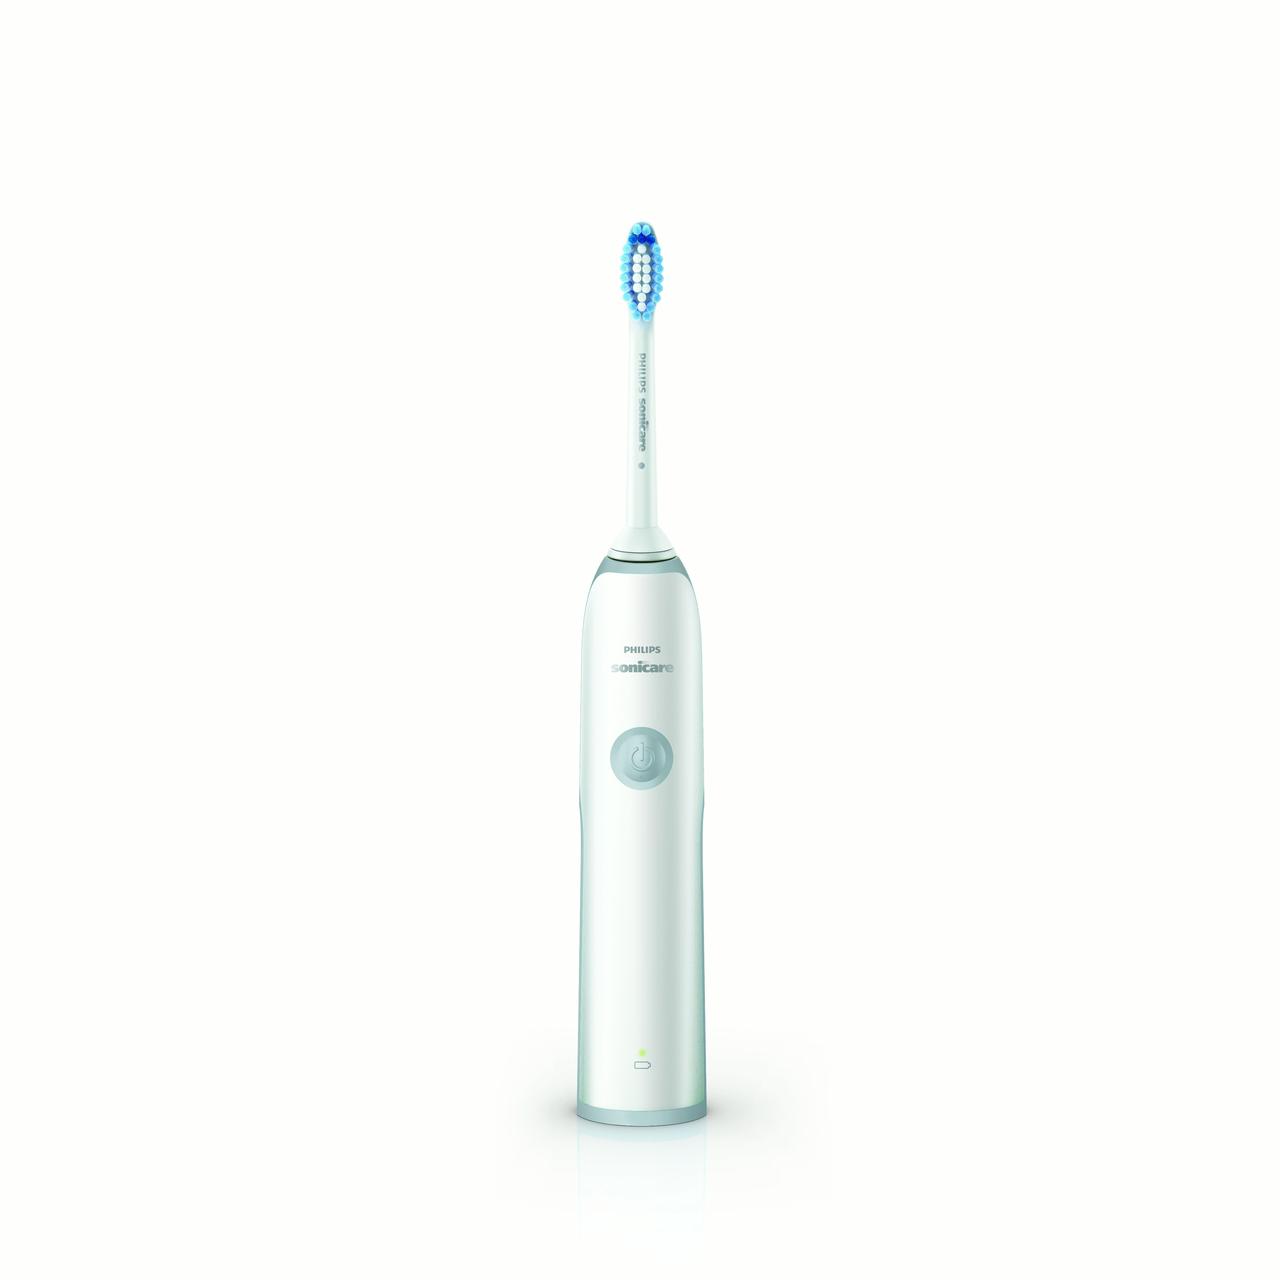 Philips Sonicare Essence+ Sonic Electric Rechargeable Toothbrush Light Blue - image 1 of 2